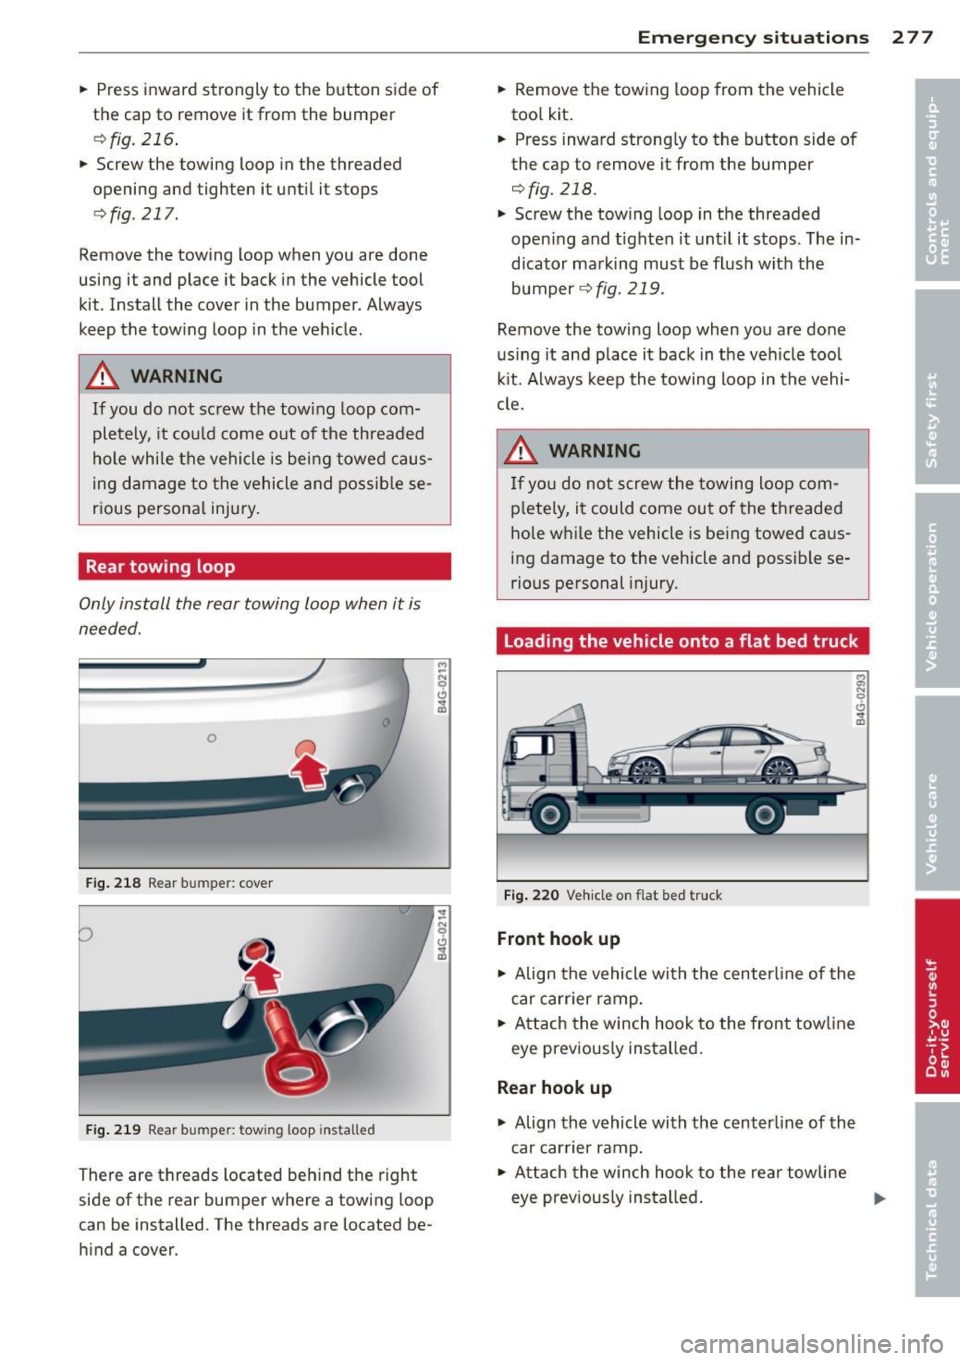 AUDI S6 2013  Owners Manual .. Press  i nward  strongly  to  the  b utton  side  of 
the  cap  to 
remove it from  the  bumper 
e::> fig . 216 . 
.. Screw  the  towing  loop  in the  threaded 
opening  and  tighten  it  u ntil  